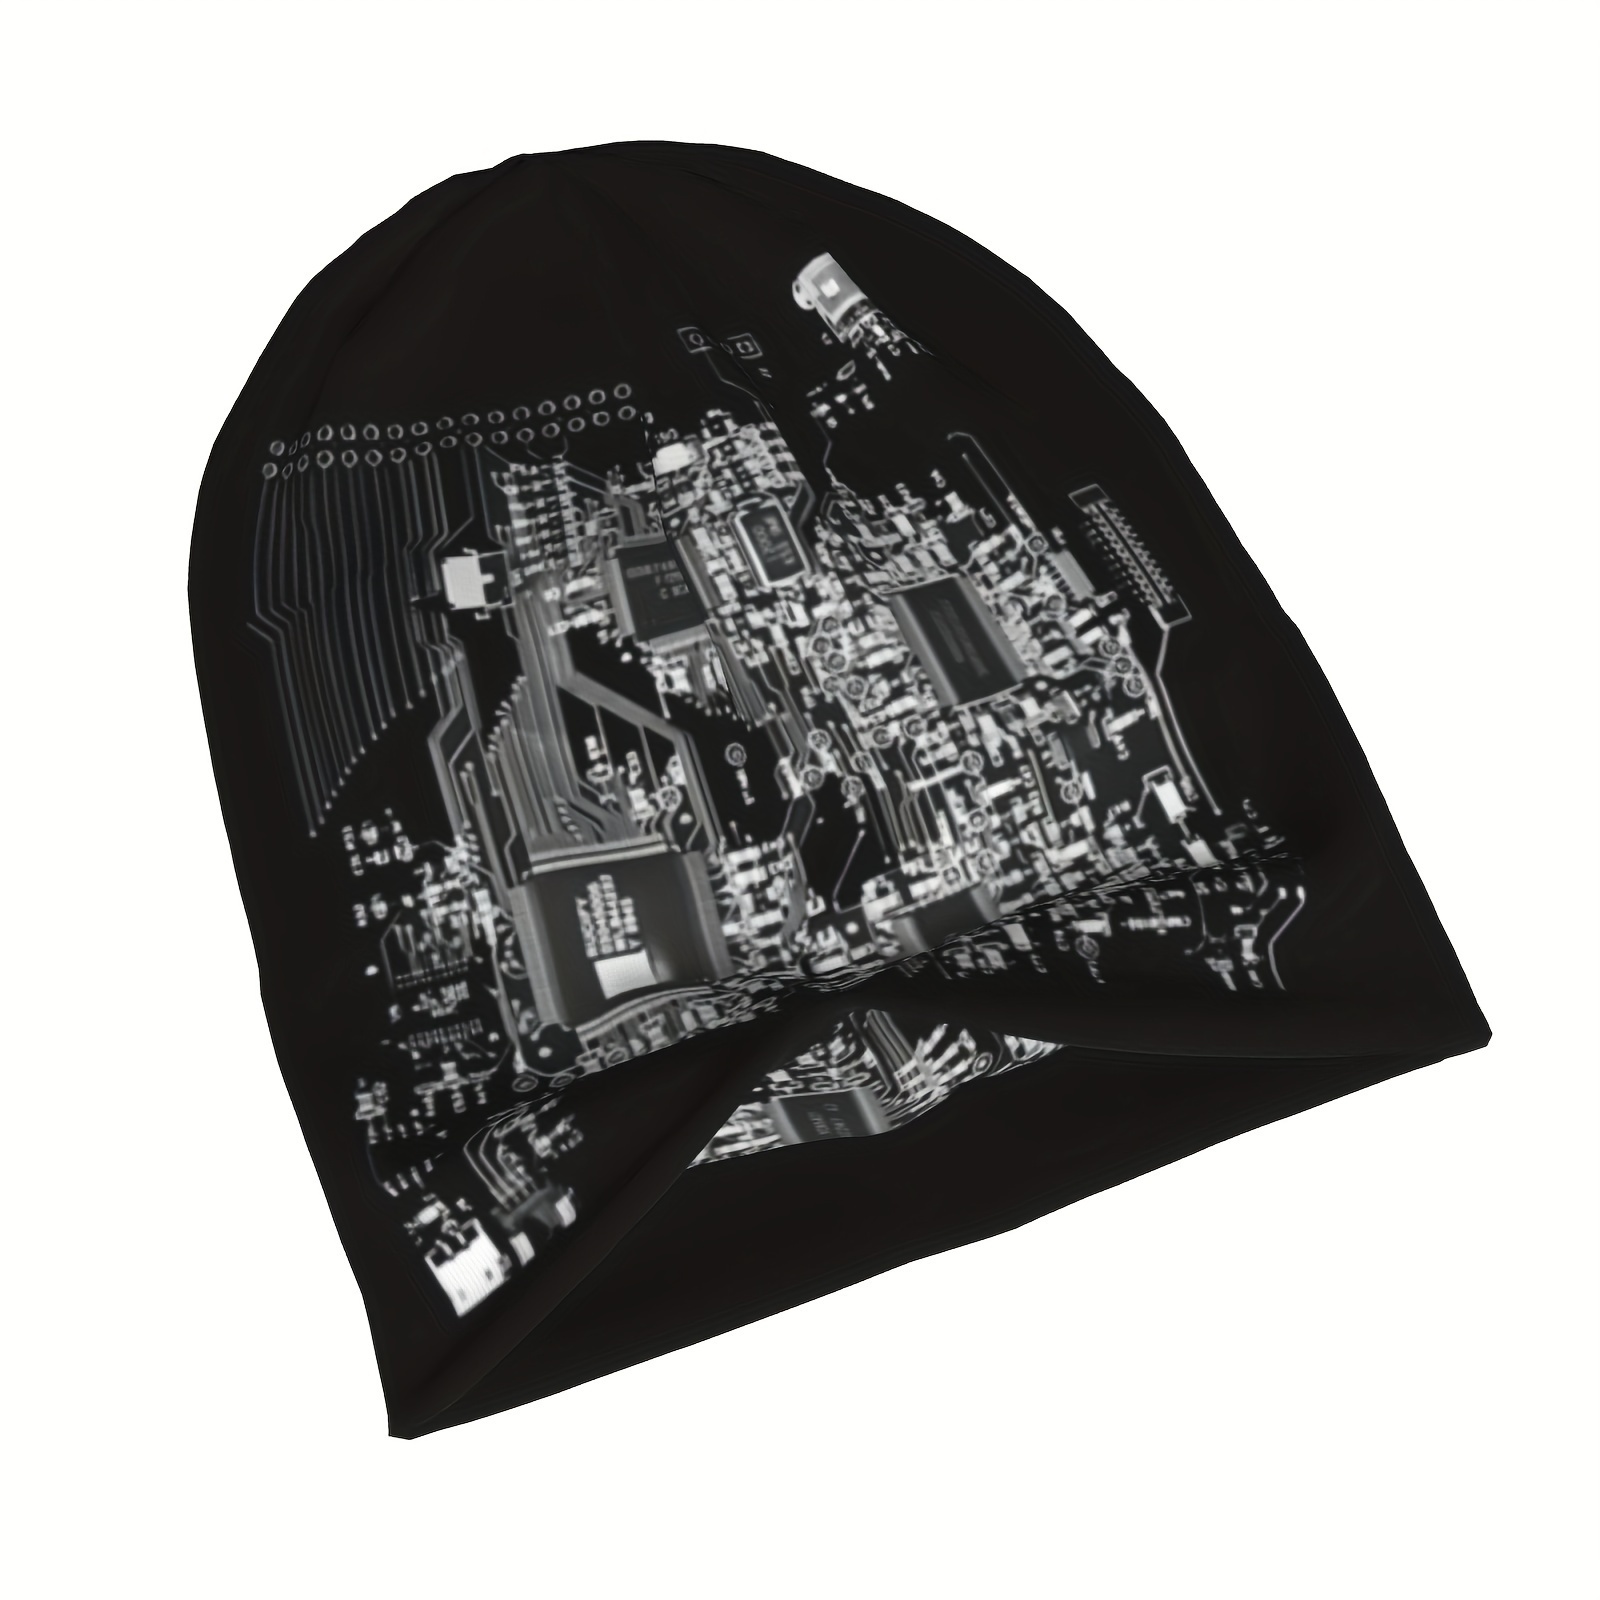 punk rock circuit board pattern beanie hat soft thin style summer bonnet hat for sports hippie y2k retro black ideal choice for gifts